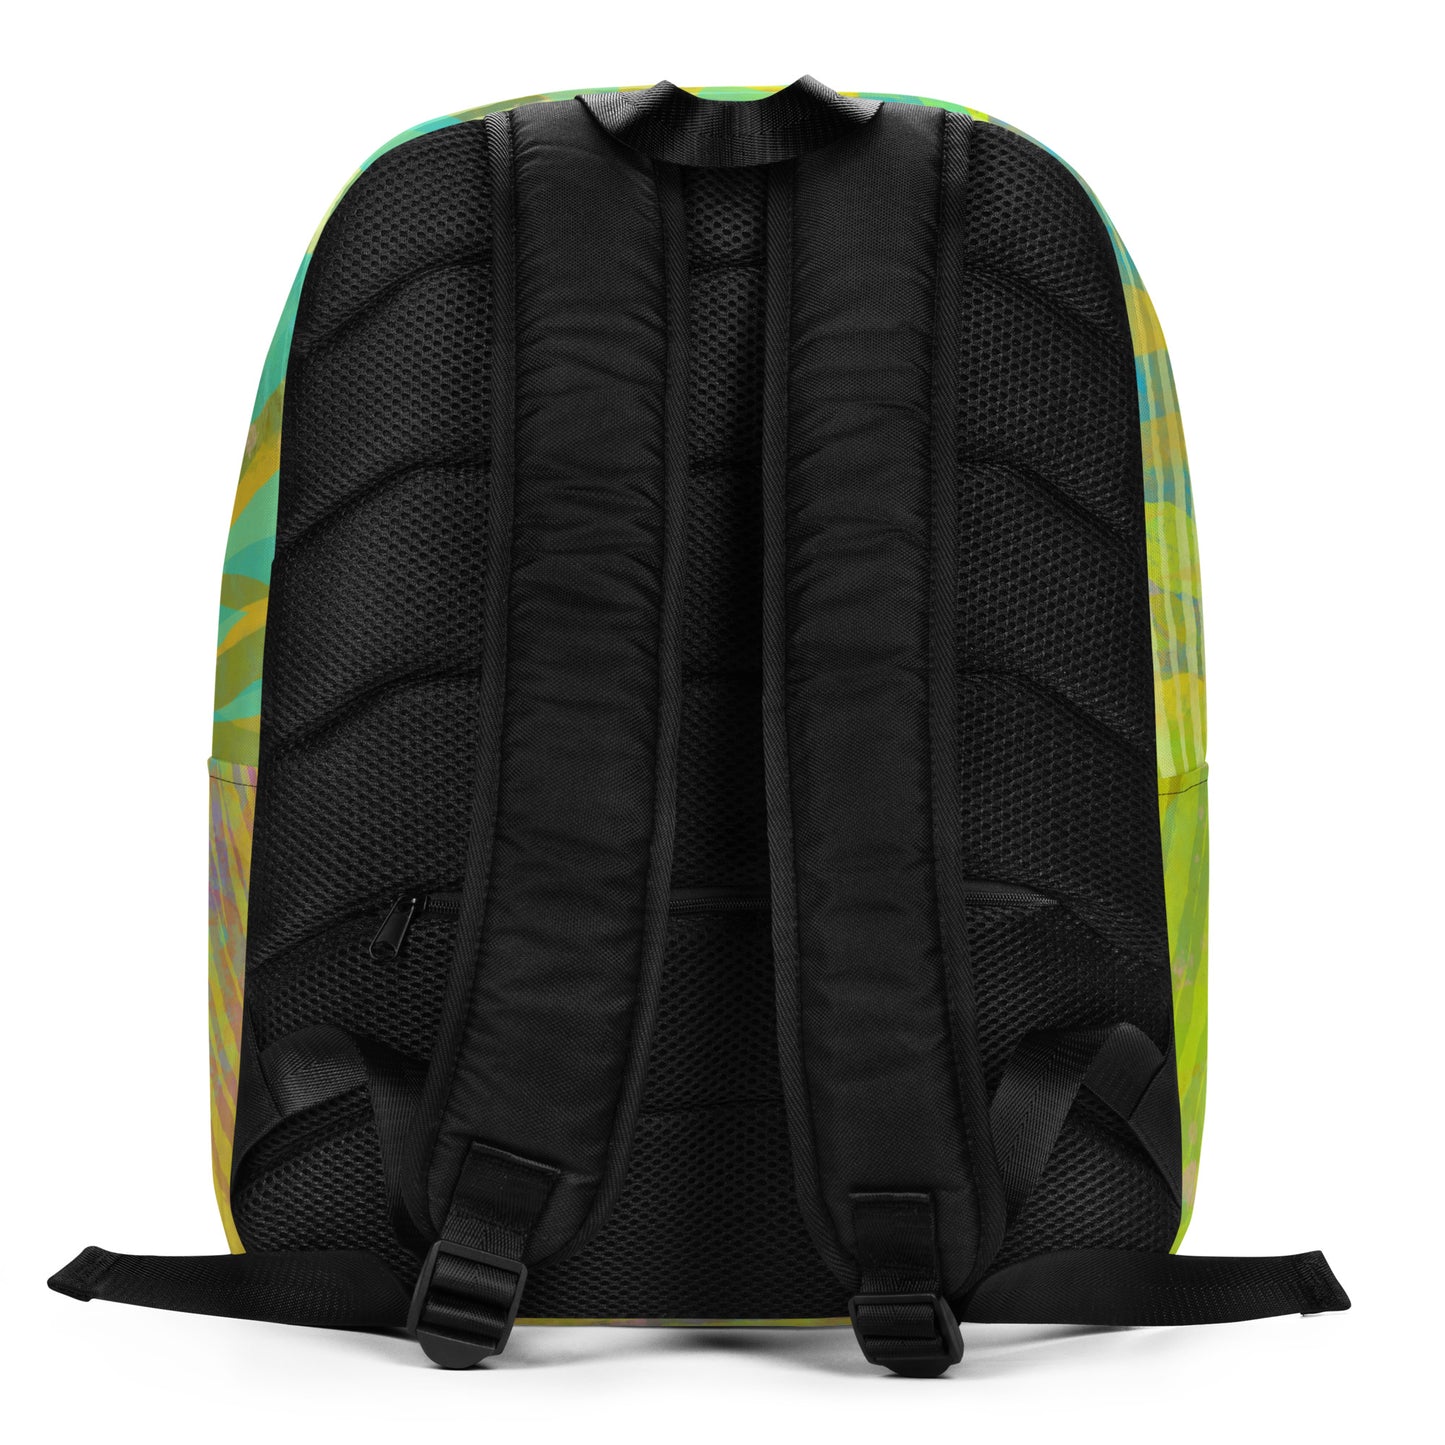 "What you plant will grow" Backpack